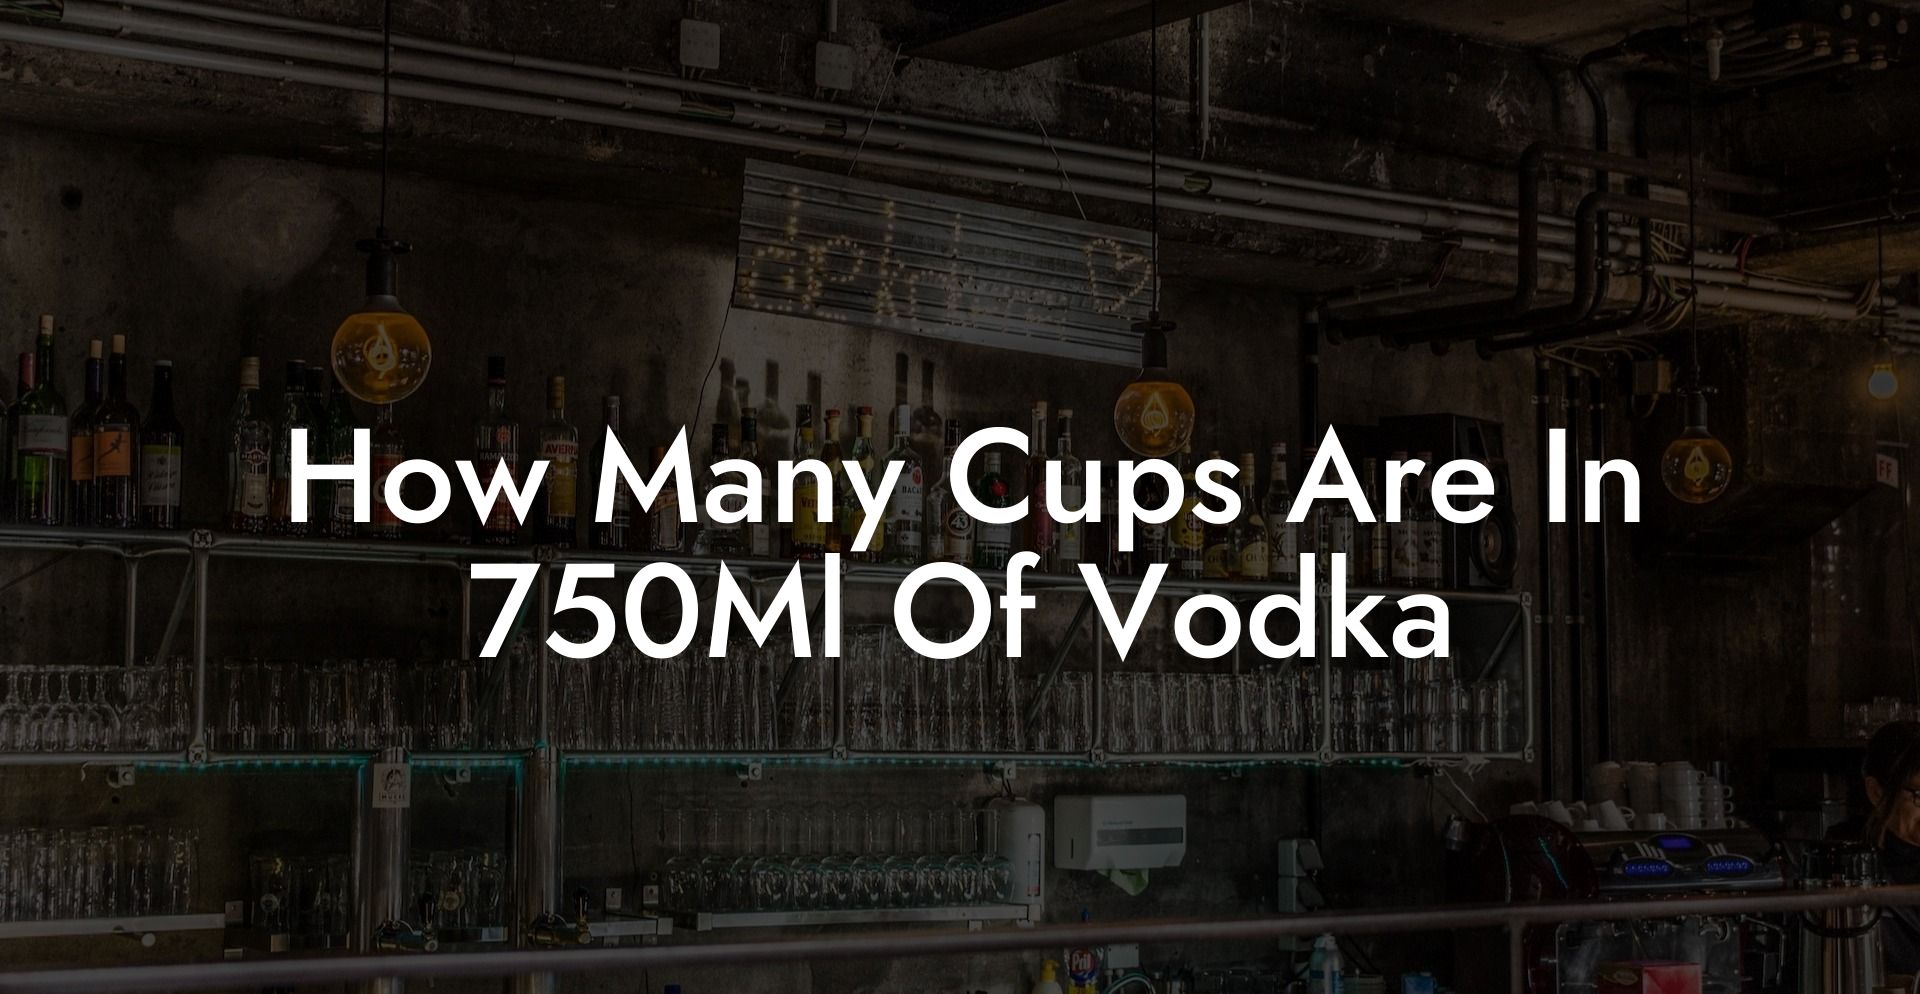 How Many Cups Are In 750Ml Of Vodka